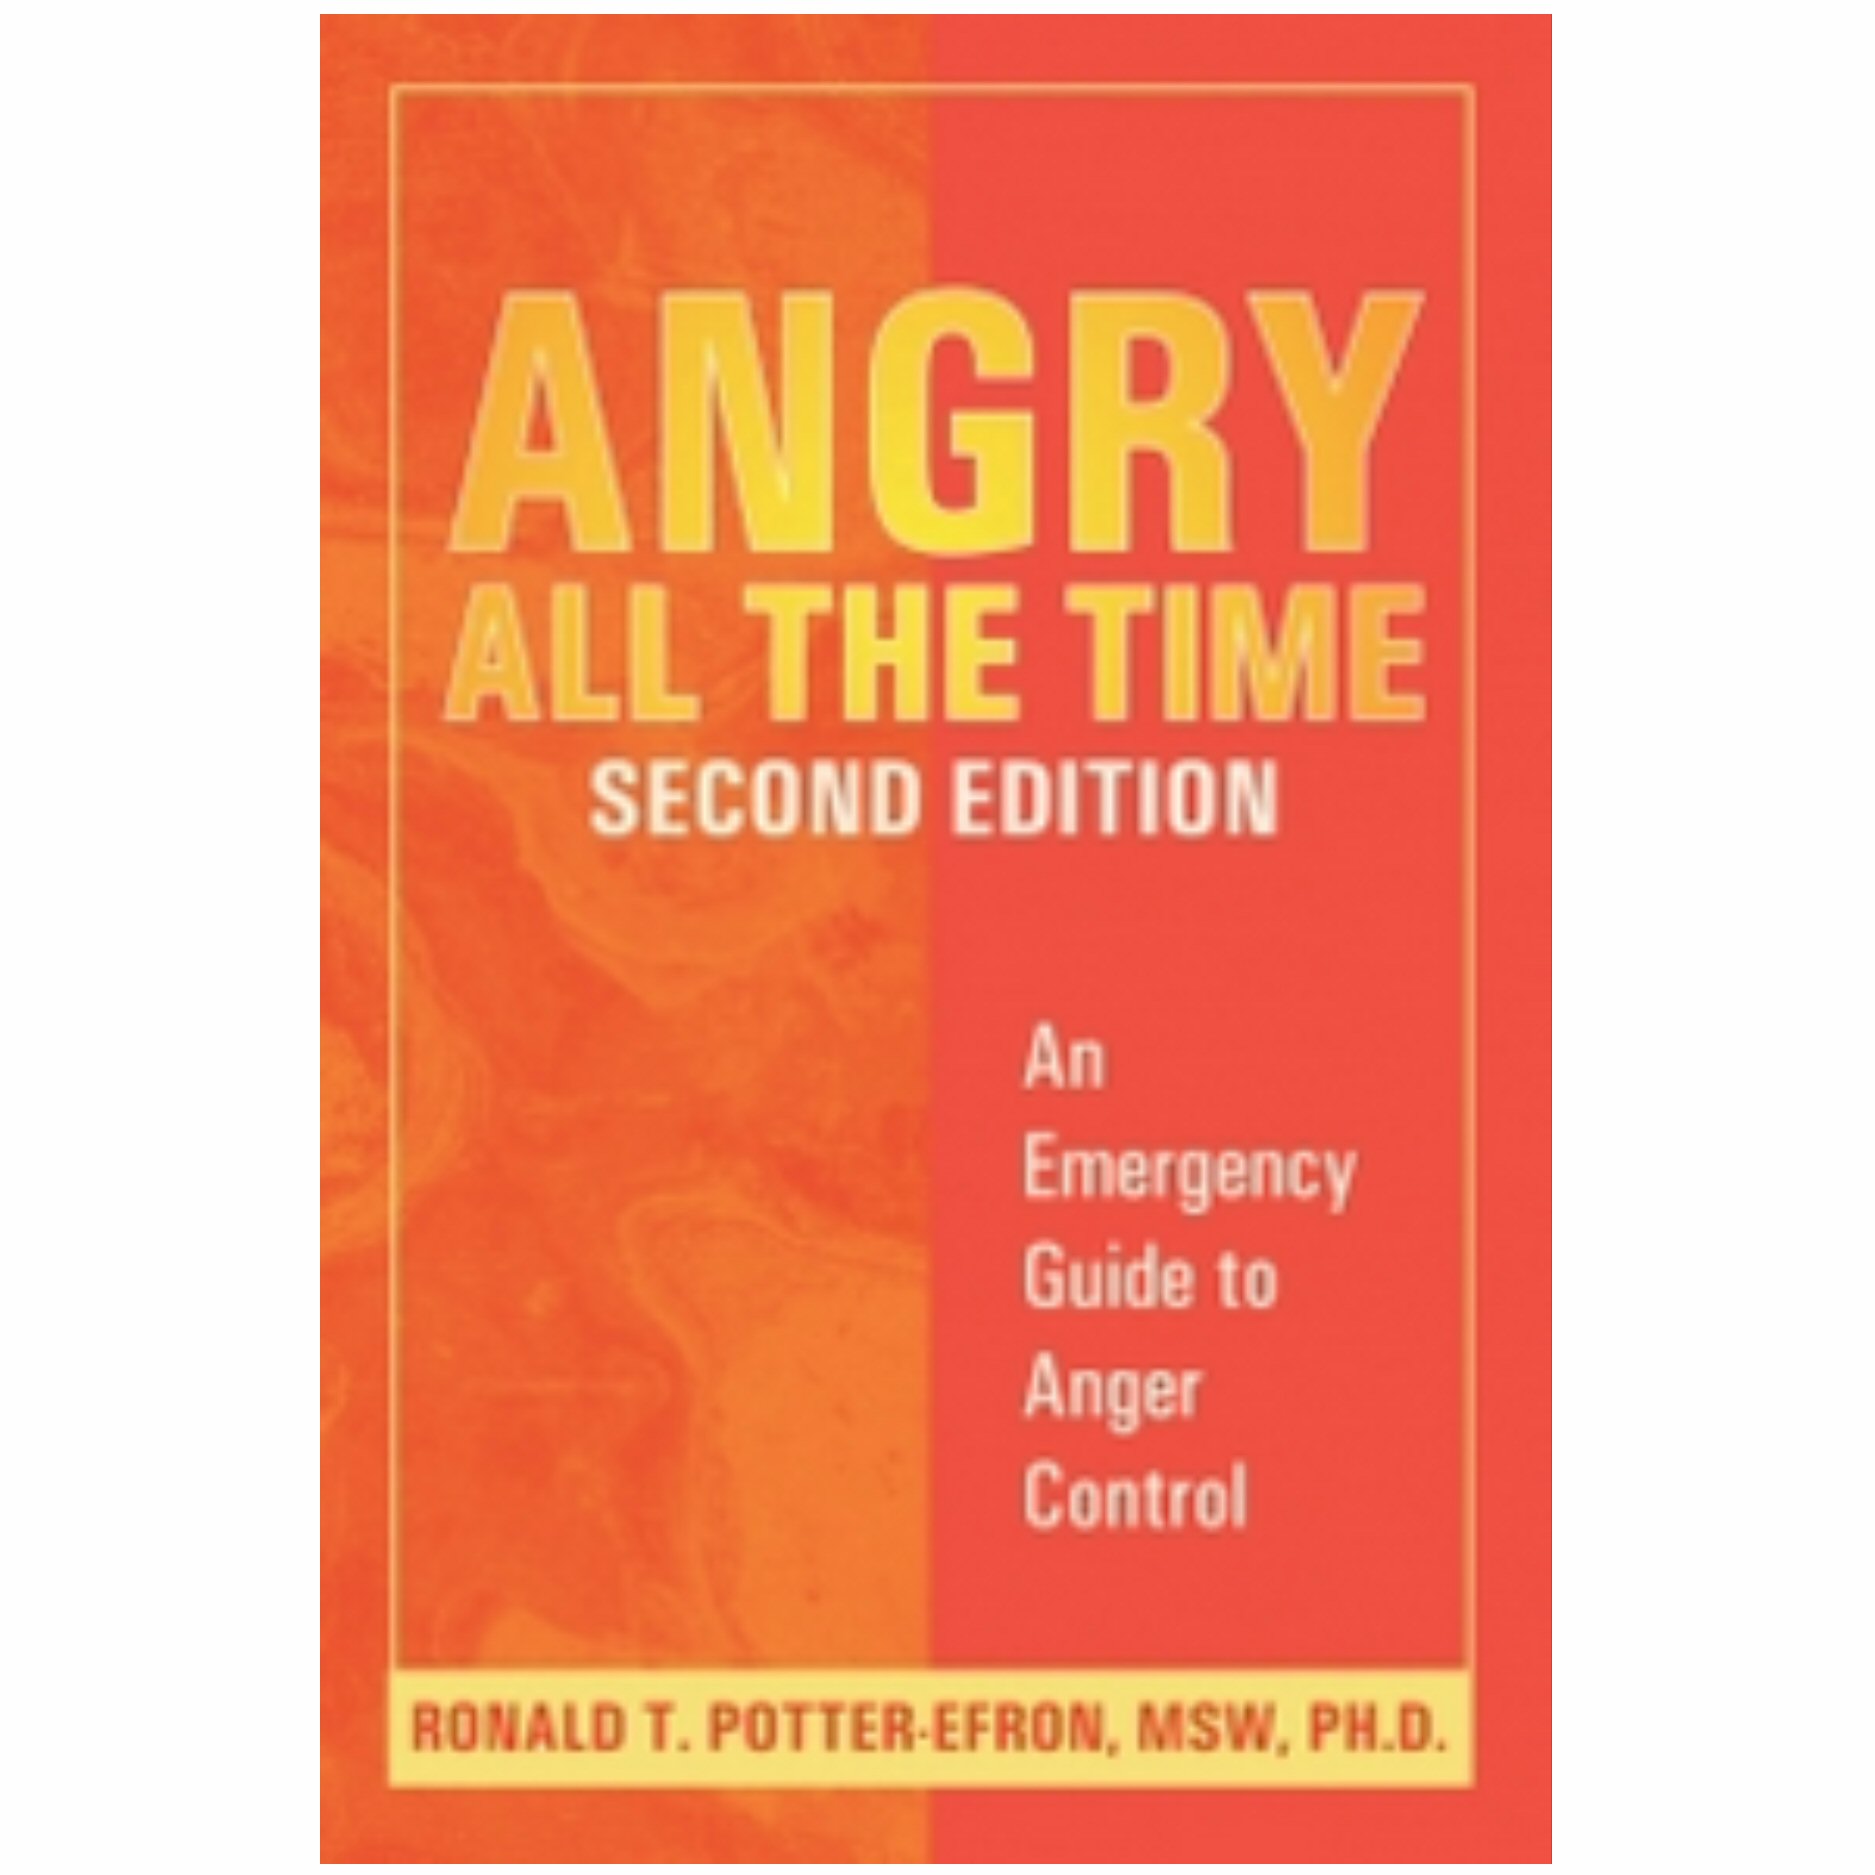 Angry All the Time: An Emergency Guide to Anger Control, 2nd edition